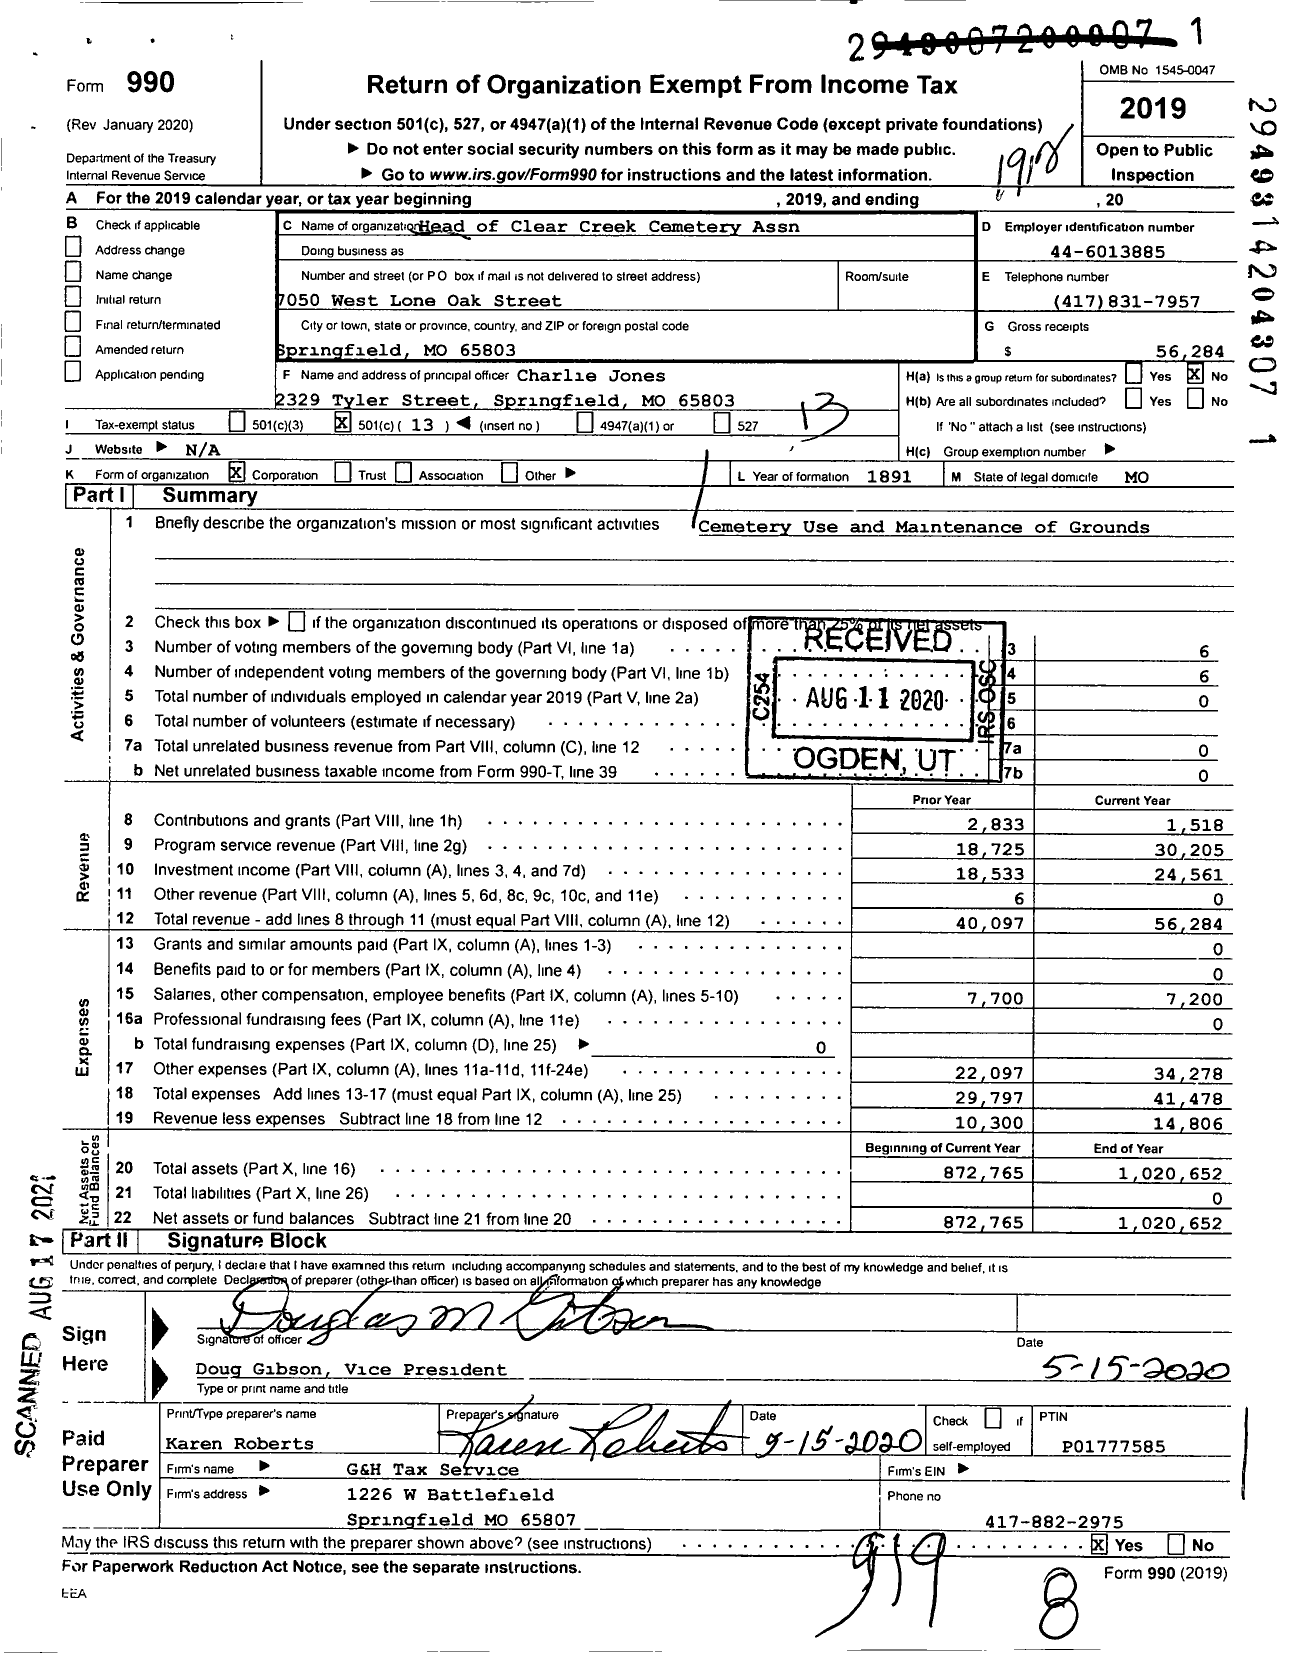 Image of first page of 2019 Form 990O for Head of Clear Creek Cemetery Association